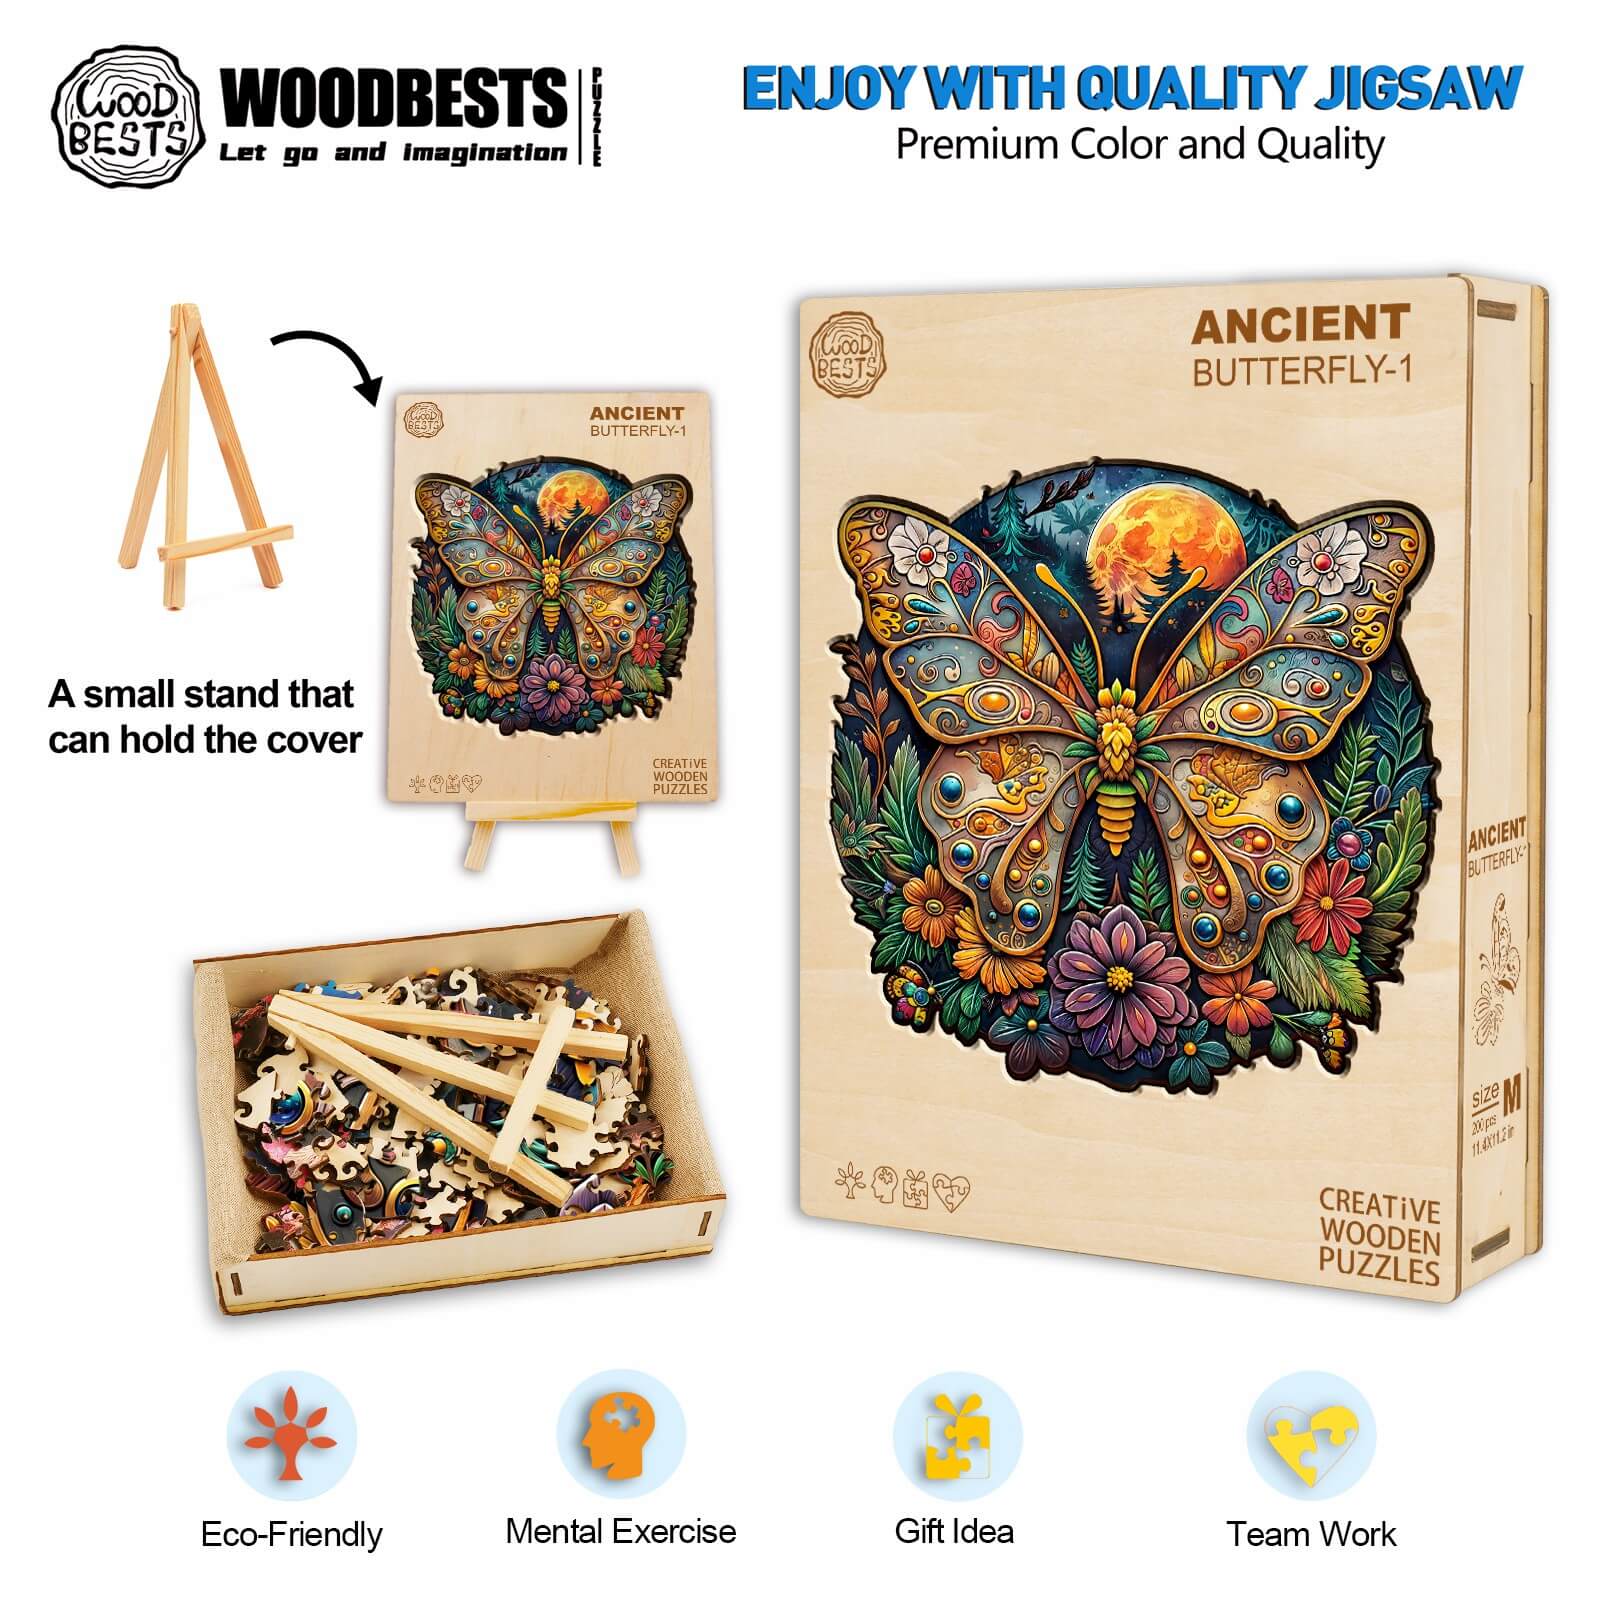 Ancient Butterfly-1 Wooden Jigsaw Puzzle